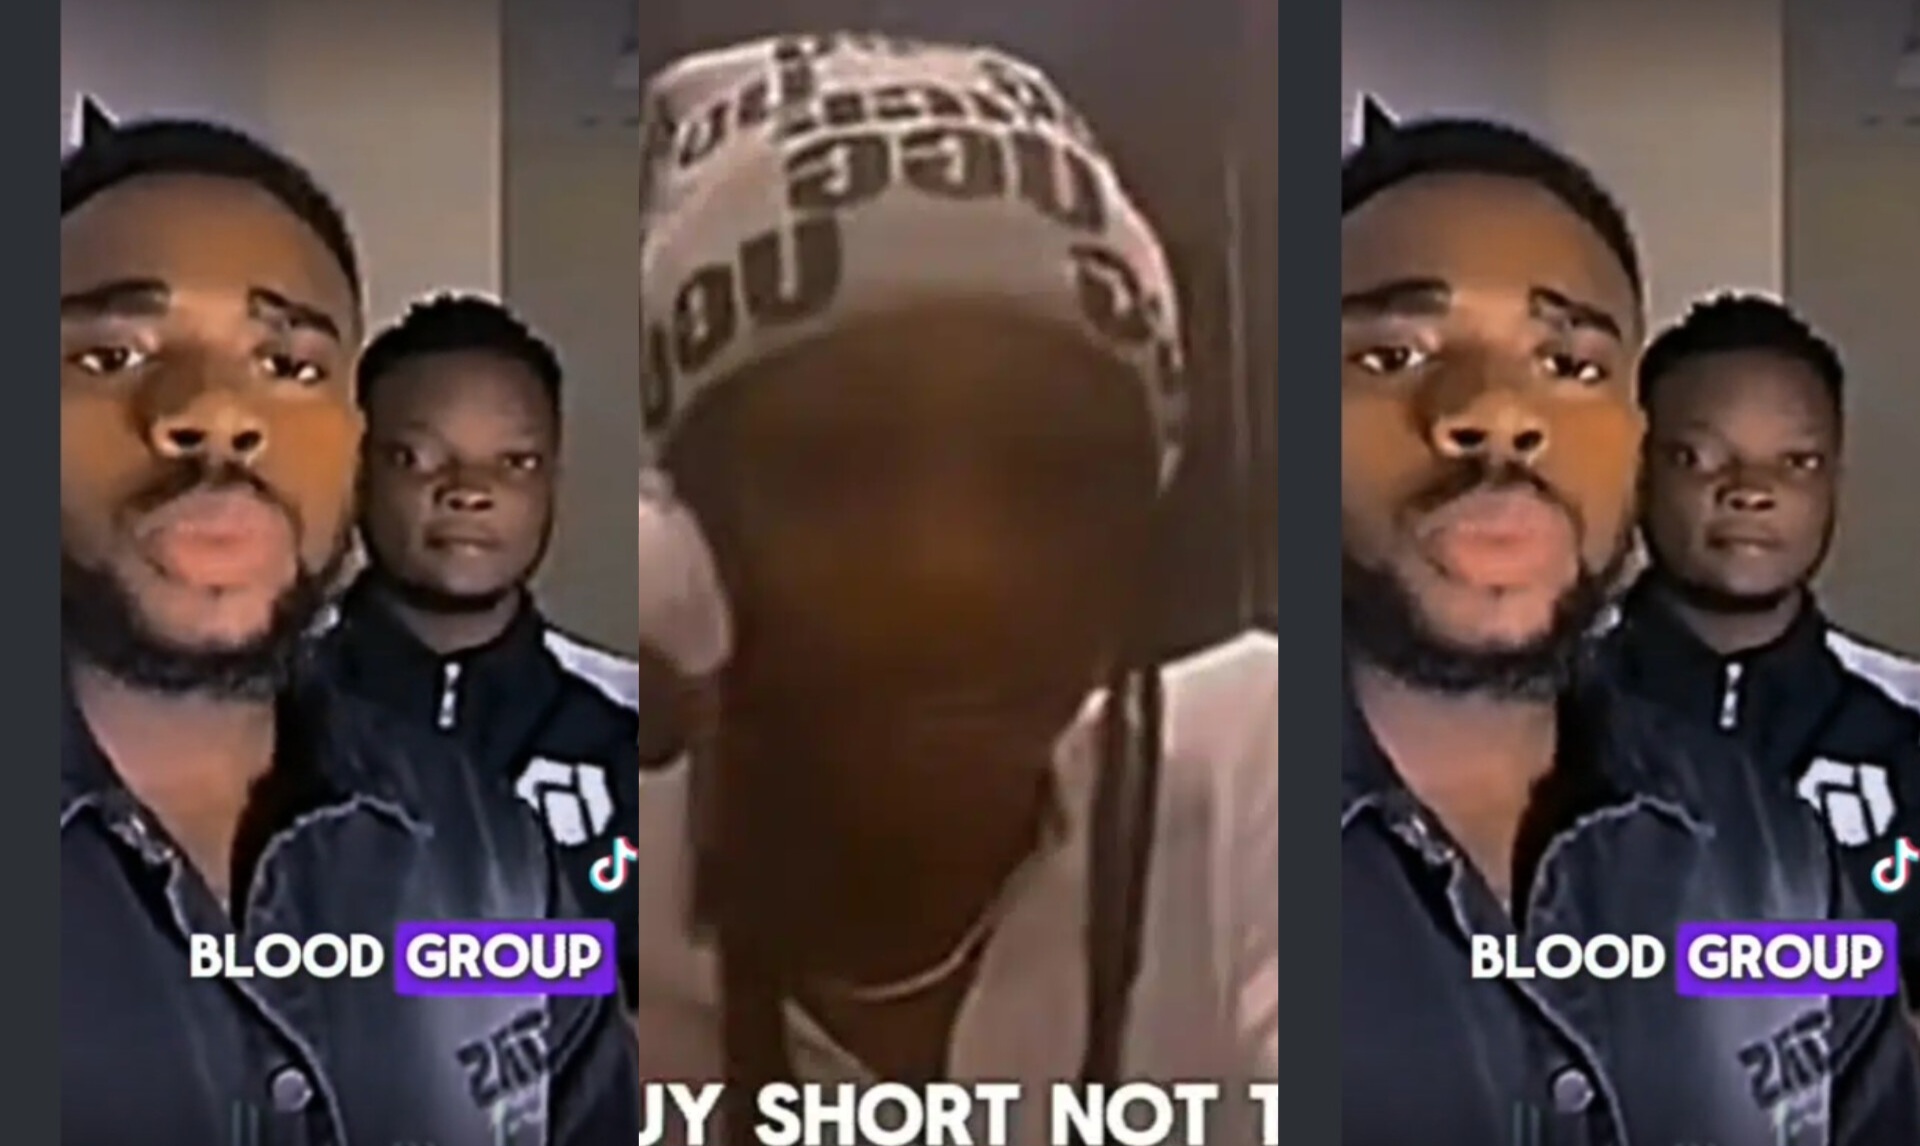 A Nigerian Lady embarrasses herself, says her genotype is ‘a short, dark-skinned guy’